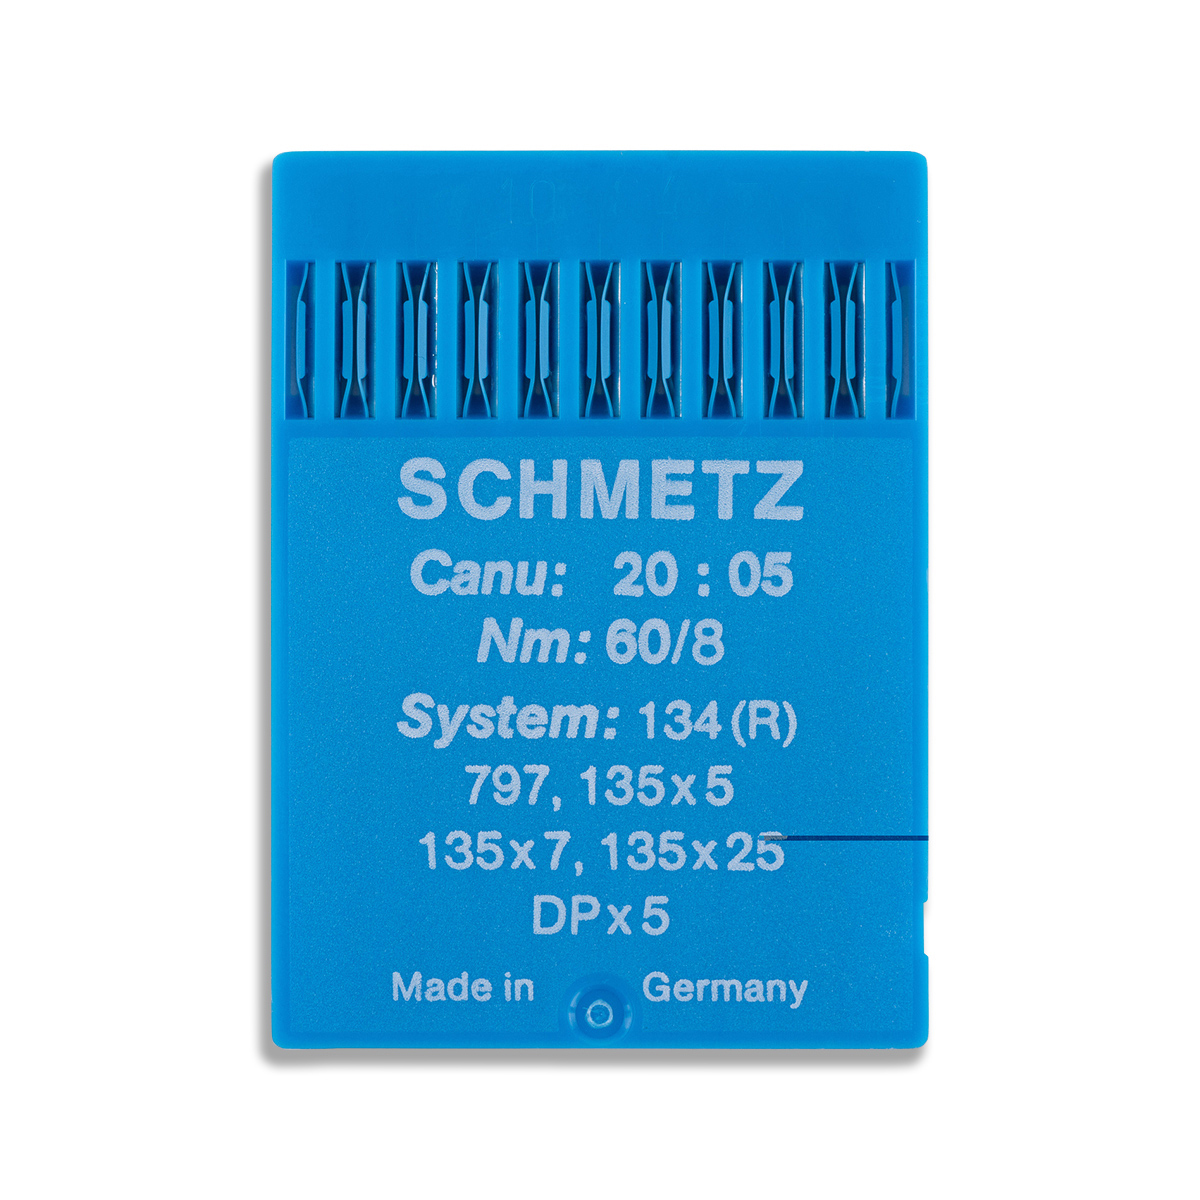 Schmetz Sewing Machine Needles, Dpx5 Ses,135x5 Ses,134 Ses,20 Pcs/lot, For  Double Needles Industrial Bartack Sewing Machines! - Sewing Needles -  AliExpress